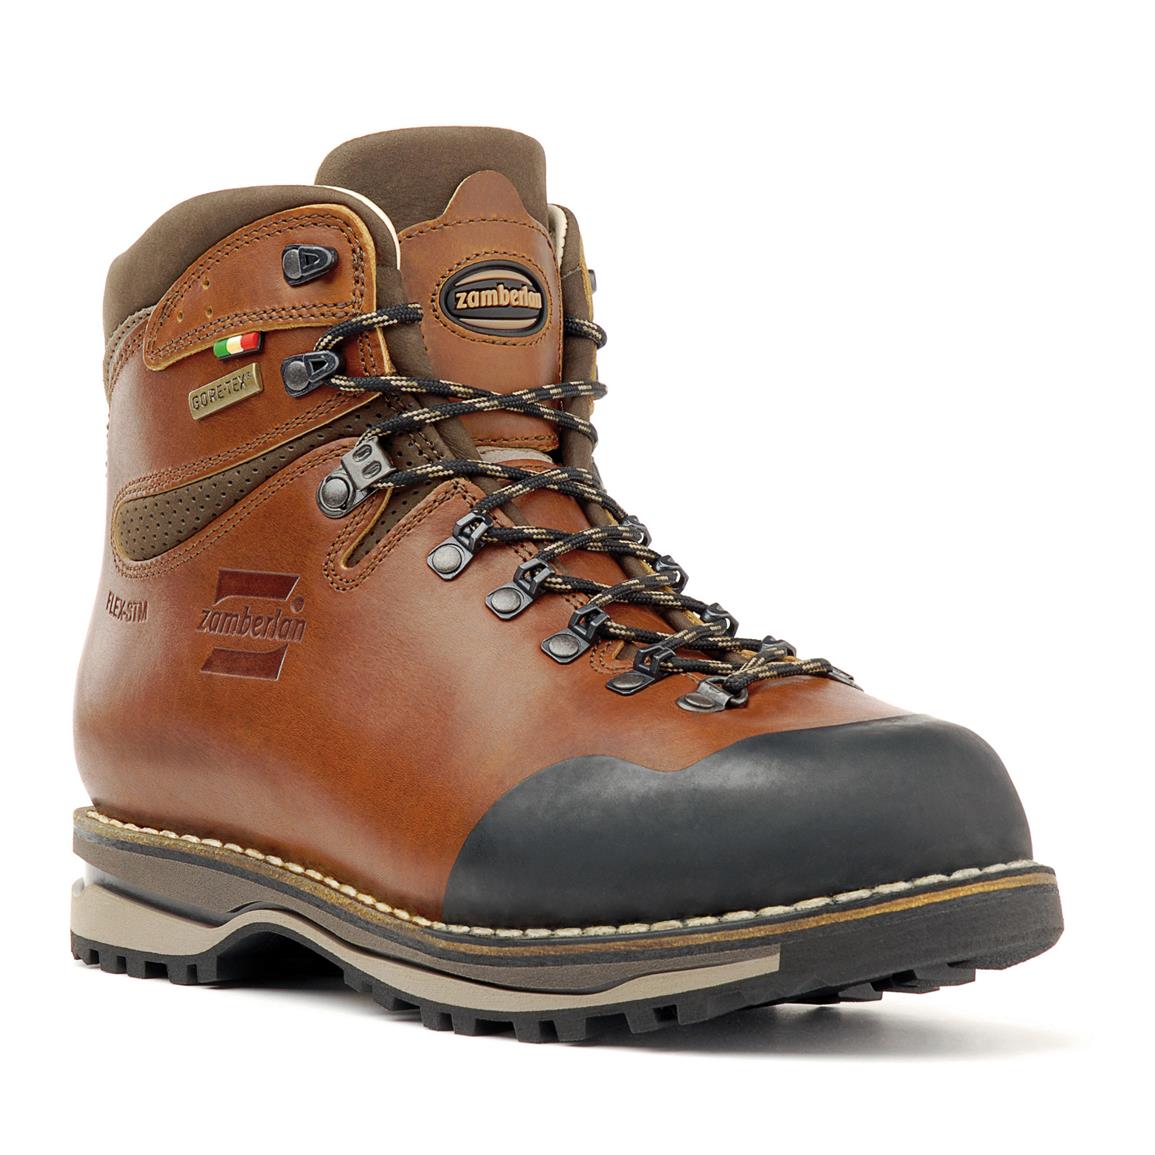 Zamberlan Tofane Nw Gtx Rr Waterproof Hunting Boots Hunting Boots At Sportsman S Guide